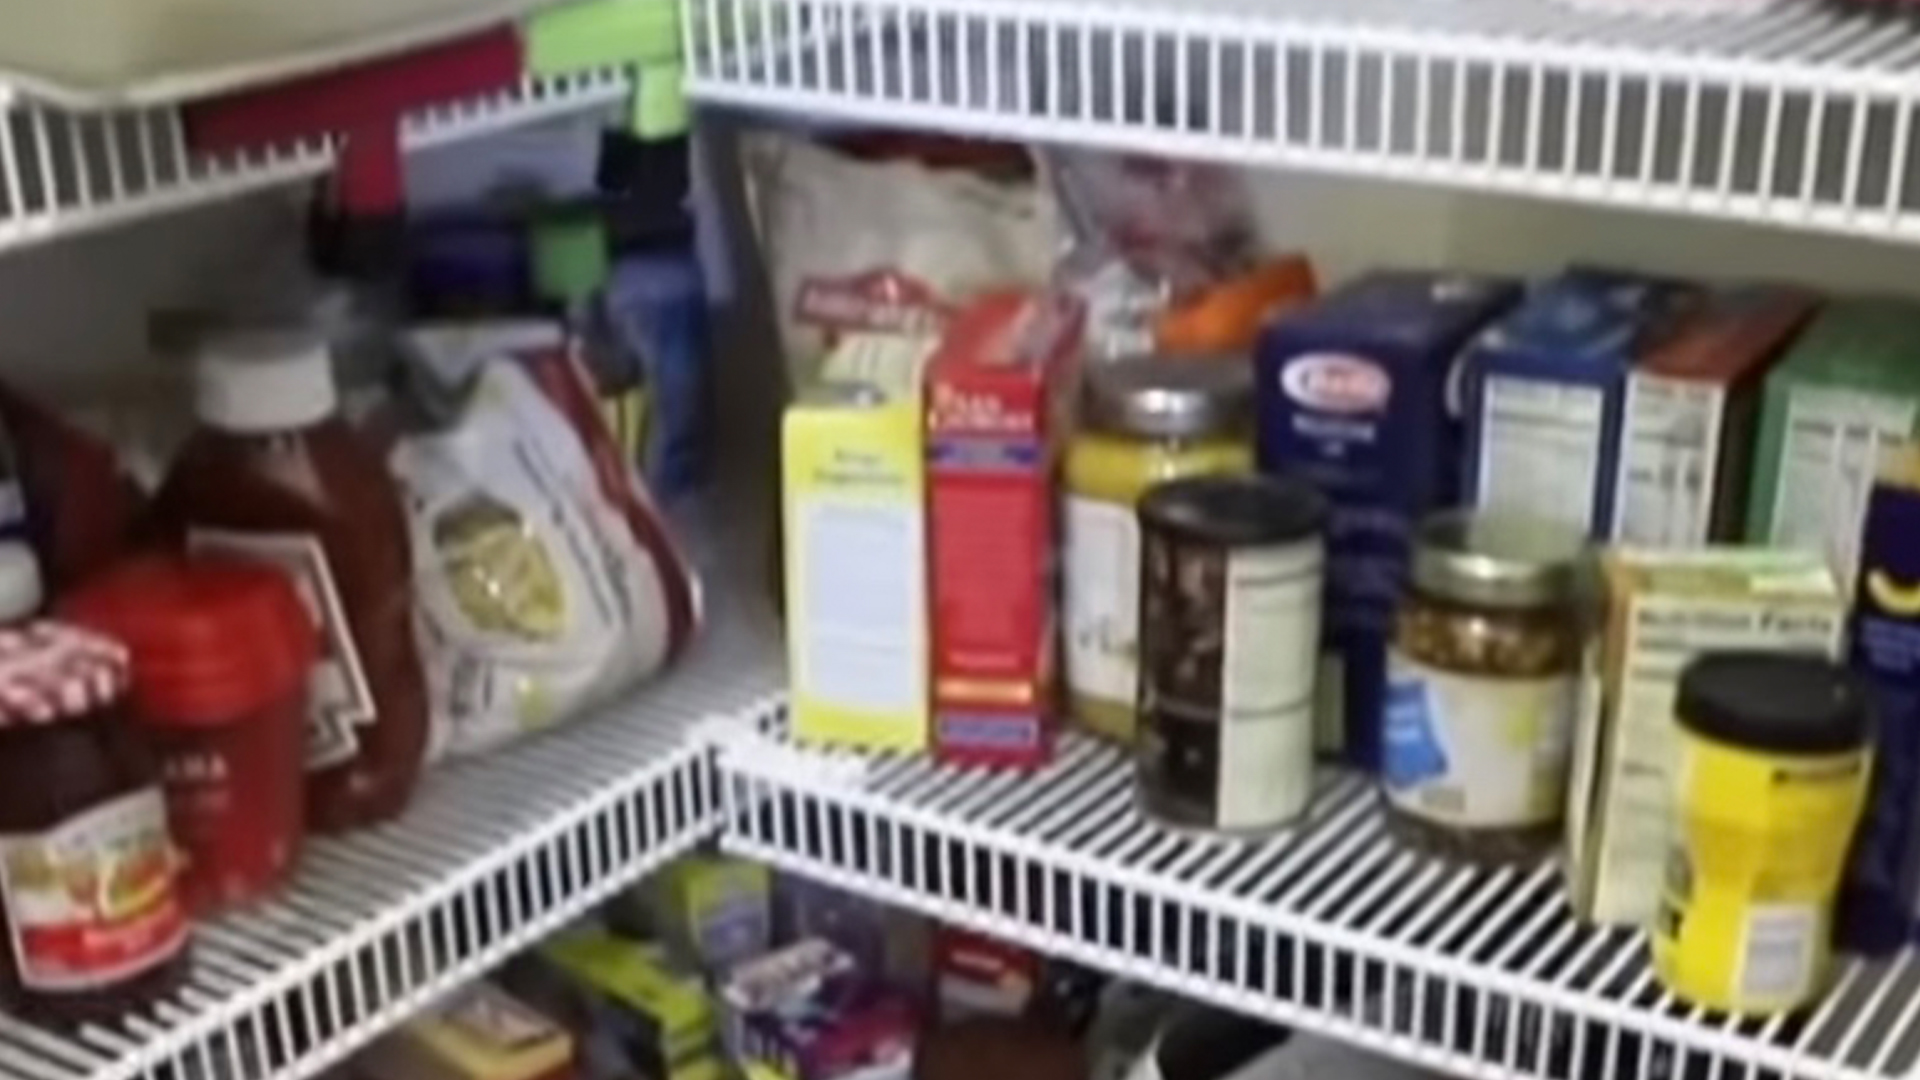 I’m a Dollar Tree superfan – I organized my entire pantry with 6 items costing $1.25